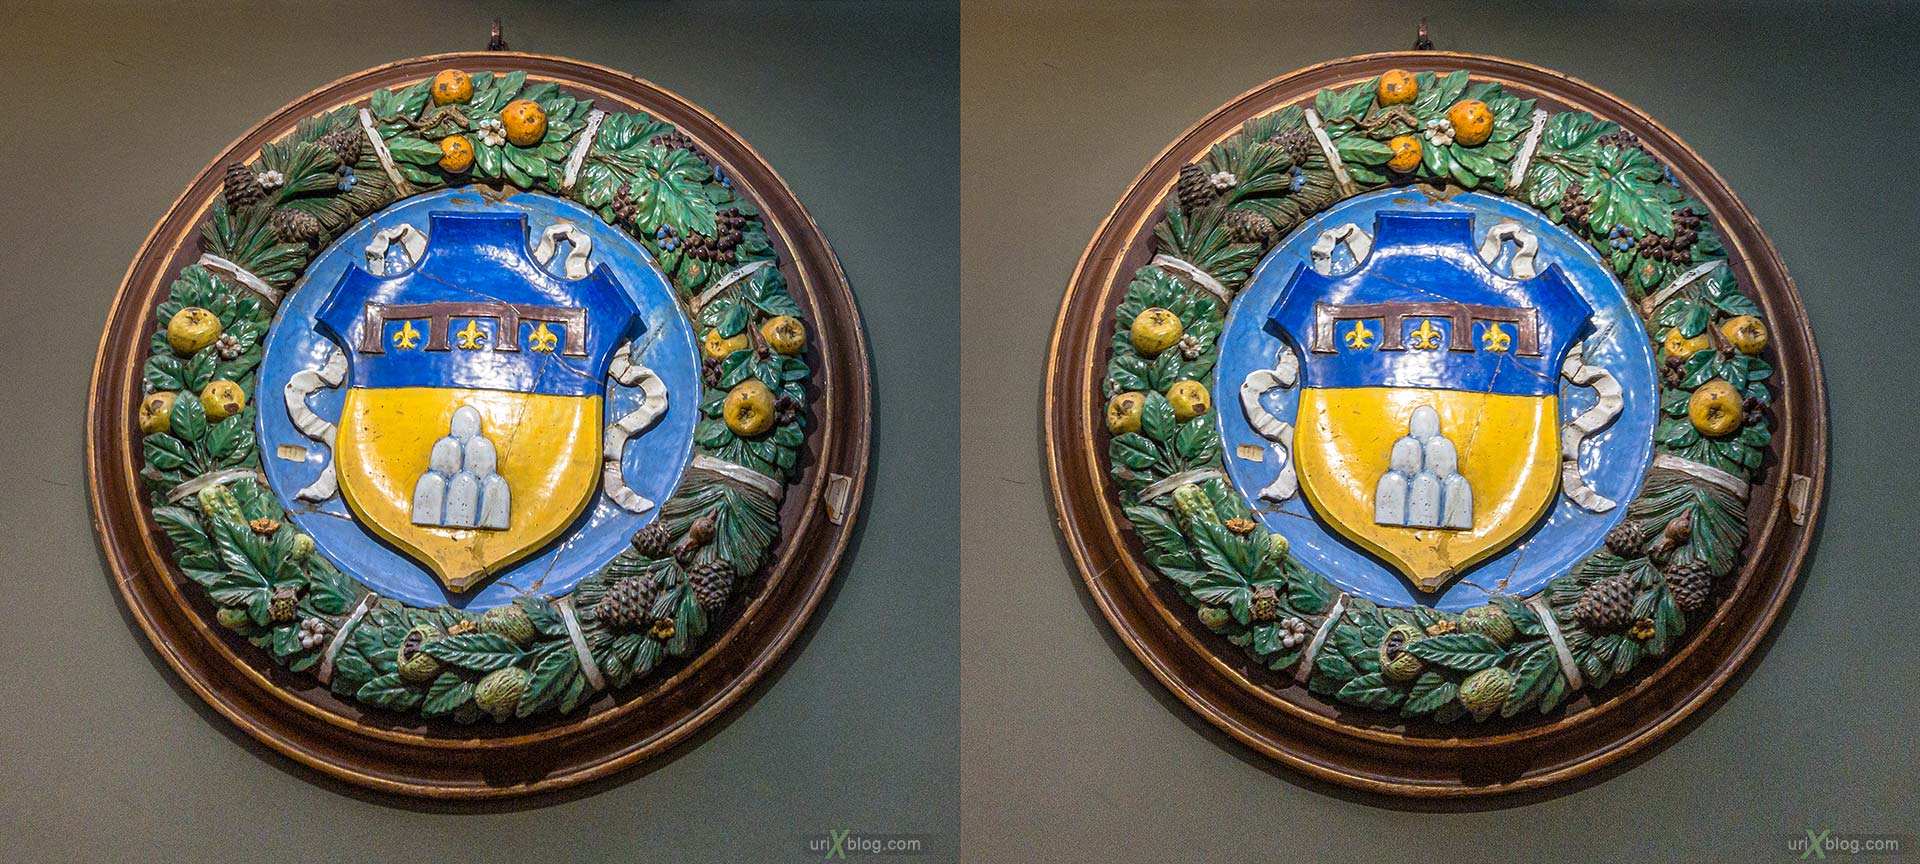 coat of arms, crest, glazed terracotta, tondo, garland, Uffizi Gallery, Contini Bonacossi Collection, Giovanni della Robbia, Florence, Firenze, Italy, 3D, stereo pair, cross-eyed, crossview, cross view stereo pair, stereoscopic